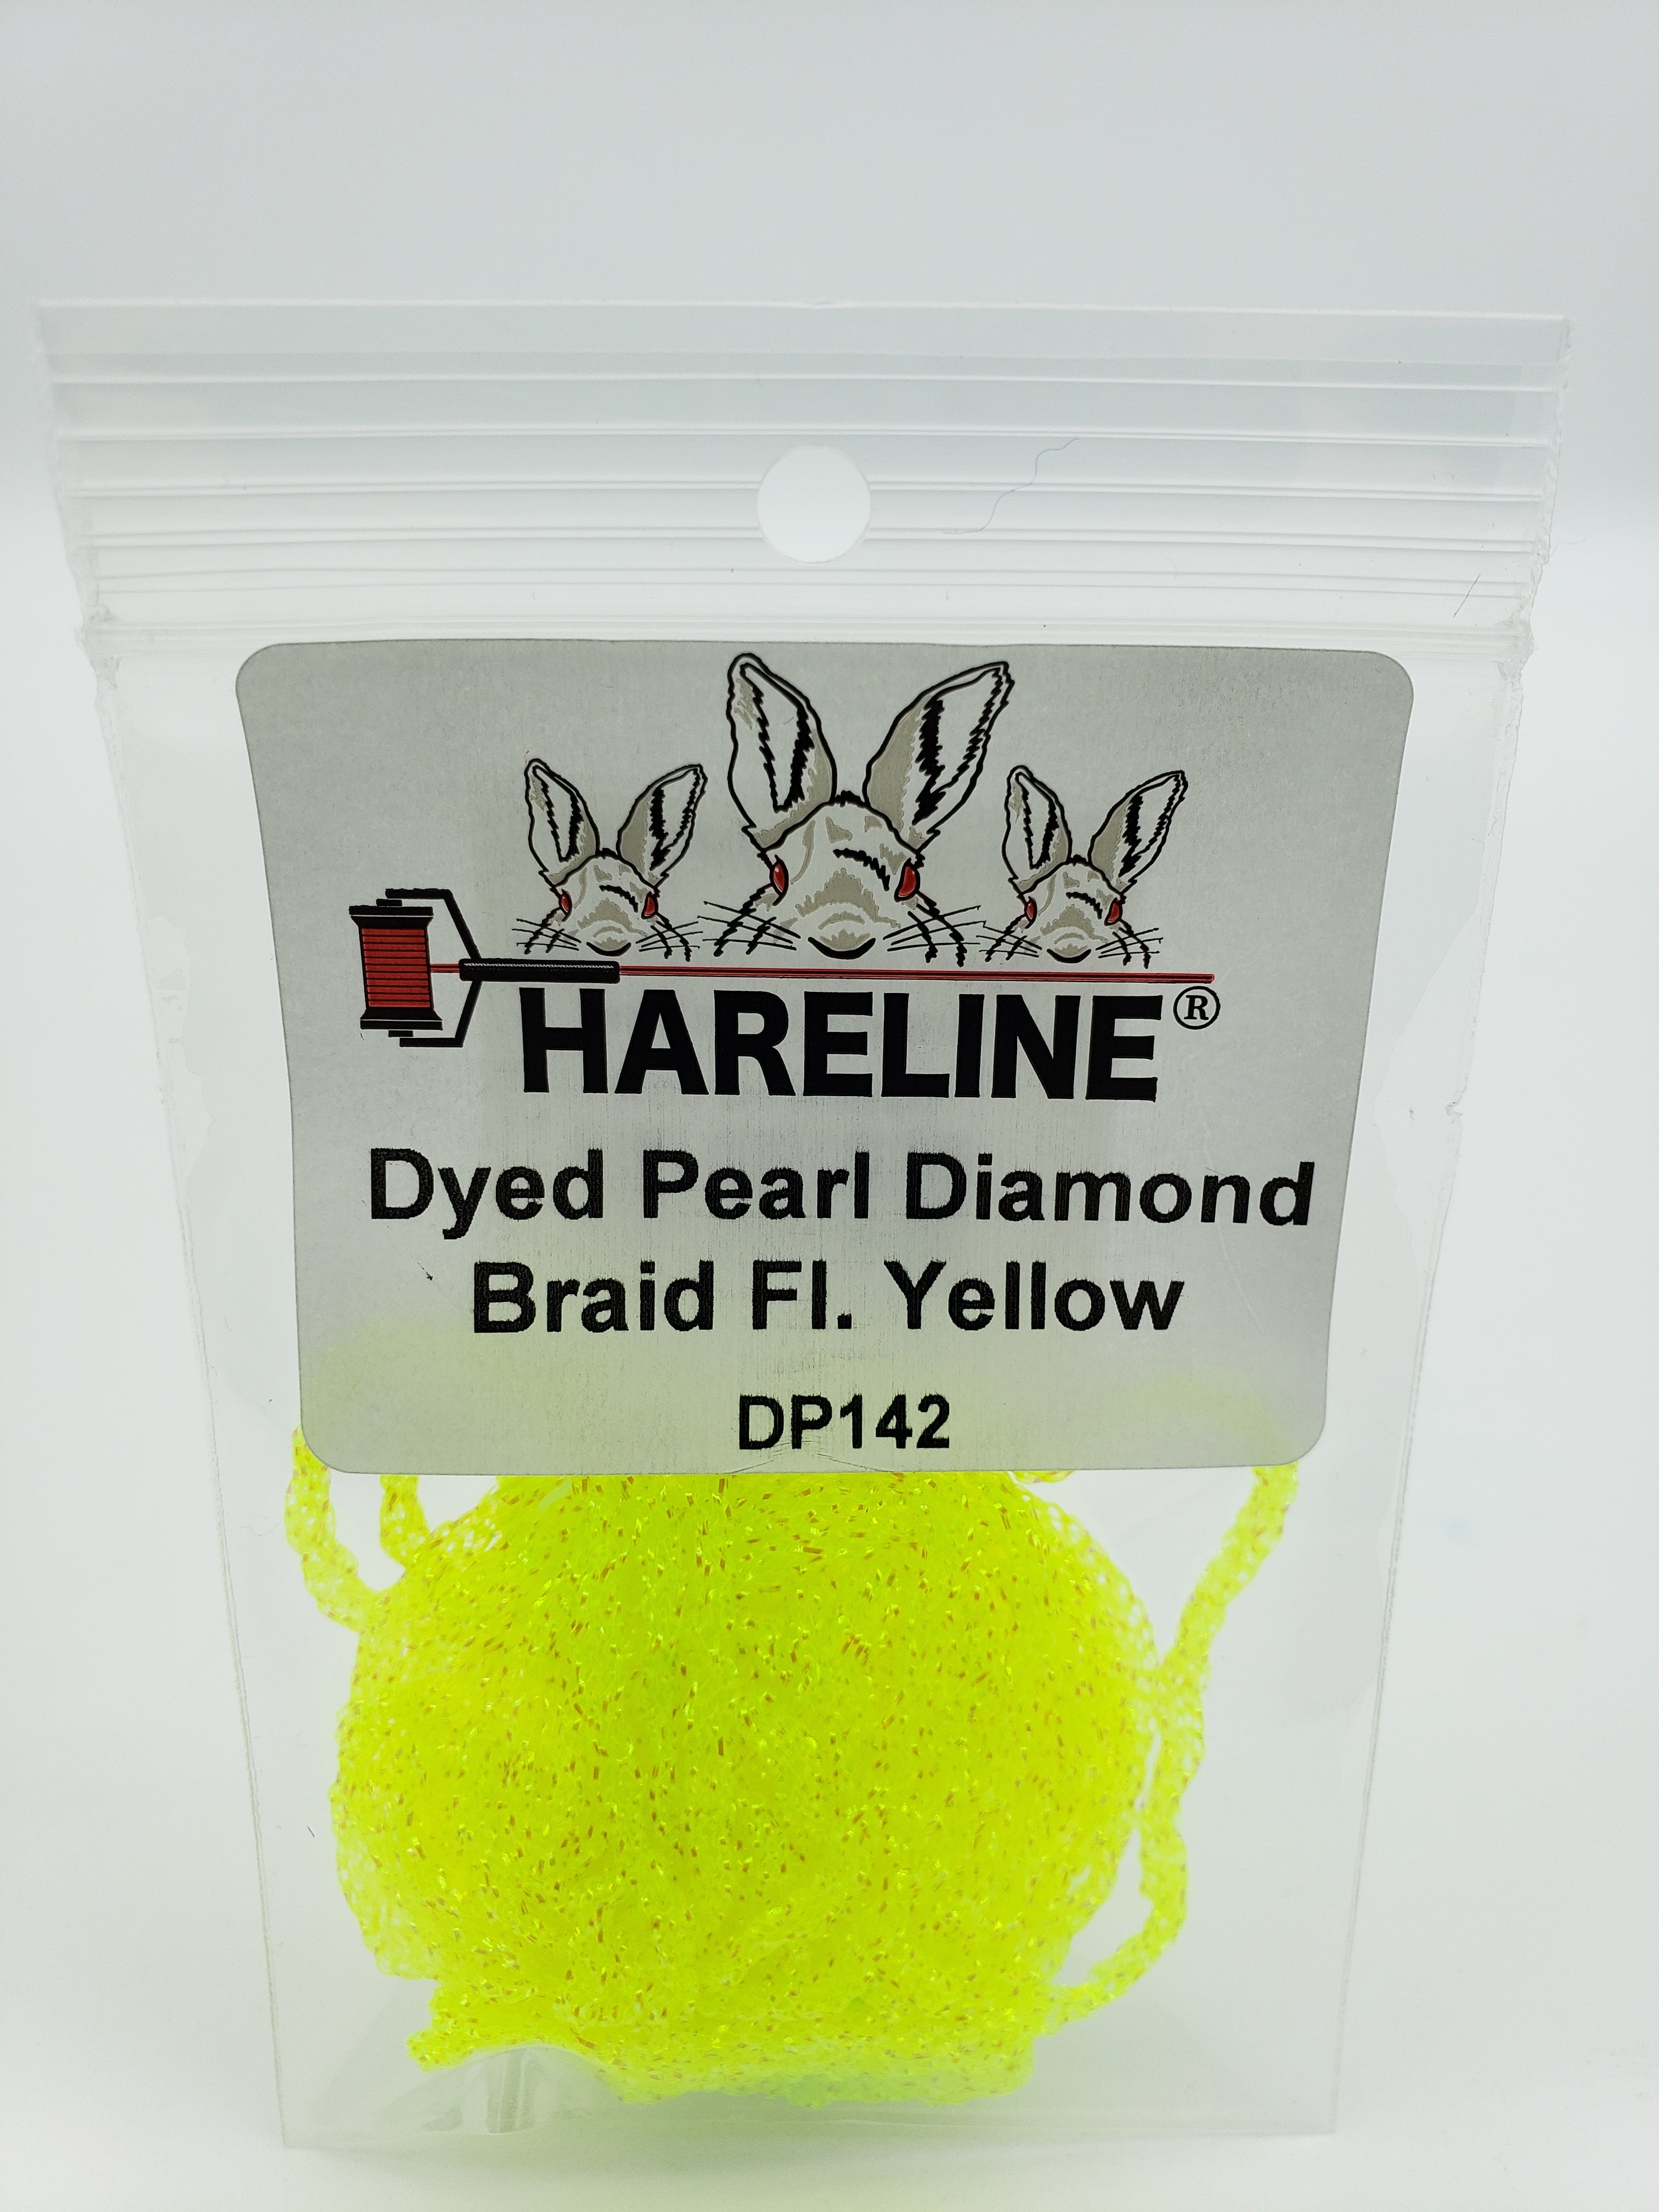 Hareline Dubbin Hareline Dyed Pearl Diamond Braid - The Painted Trout